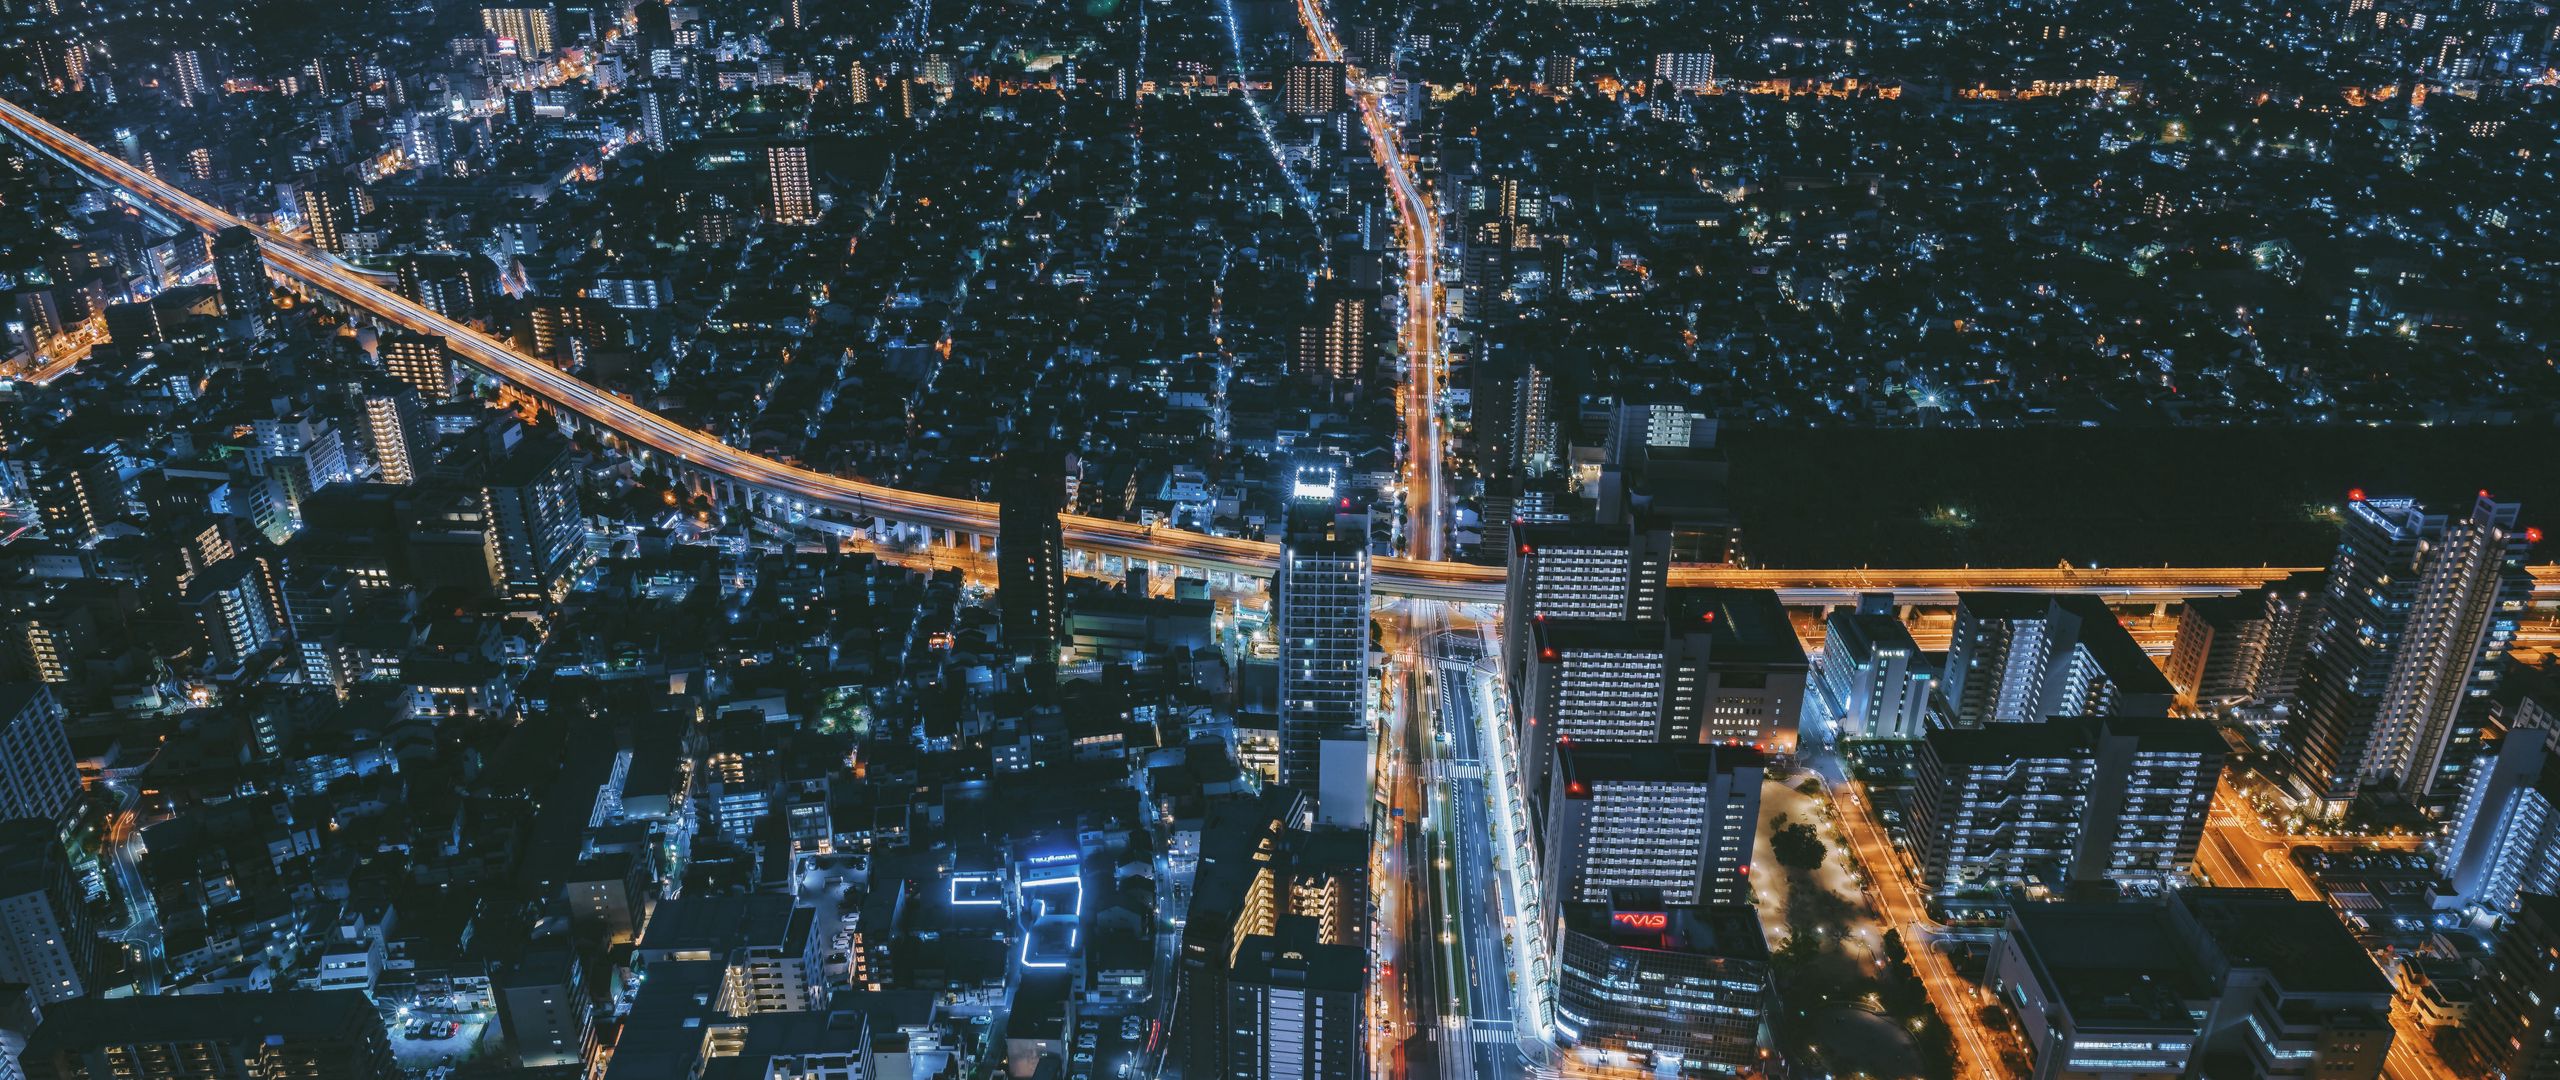 Download wallpaper 2560x1080 night city, top view, osaka, japan dual wide  1080p hd background